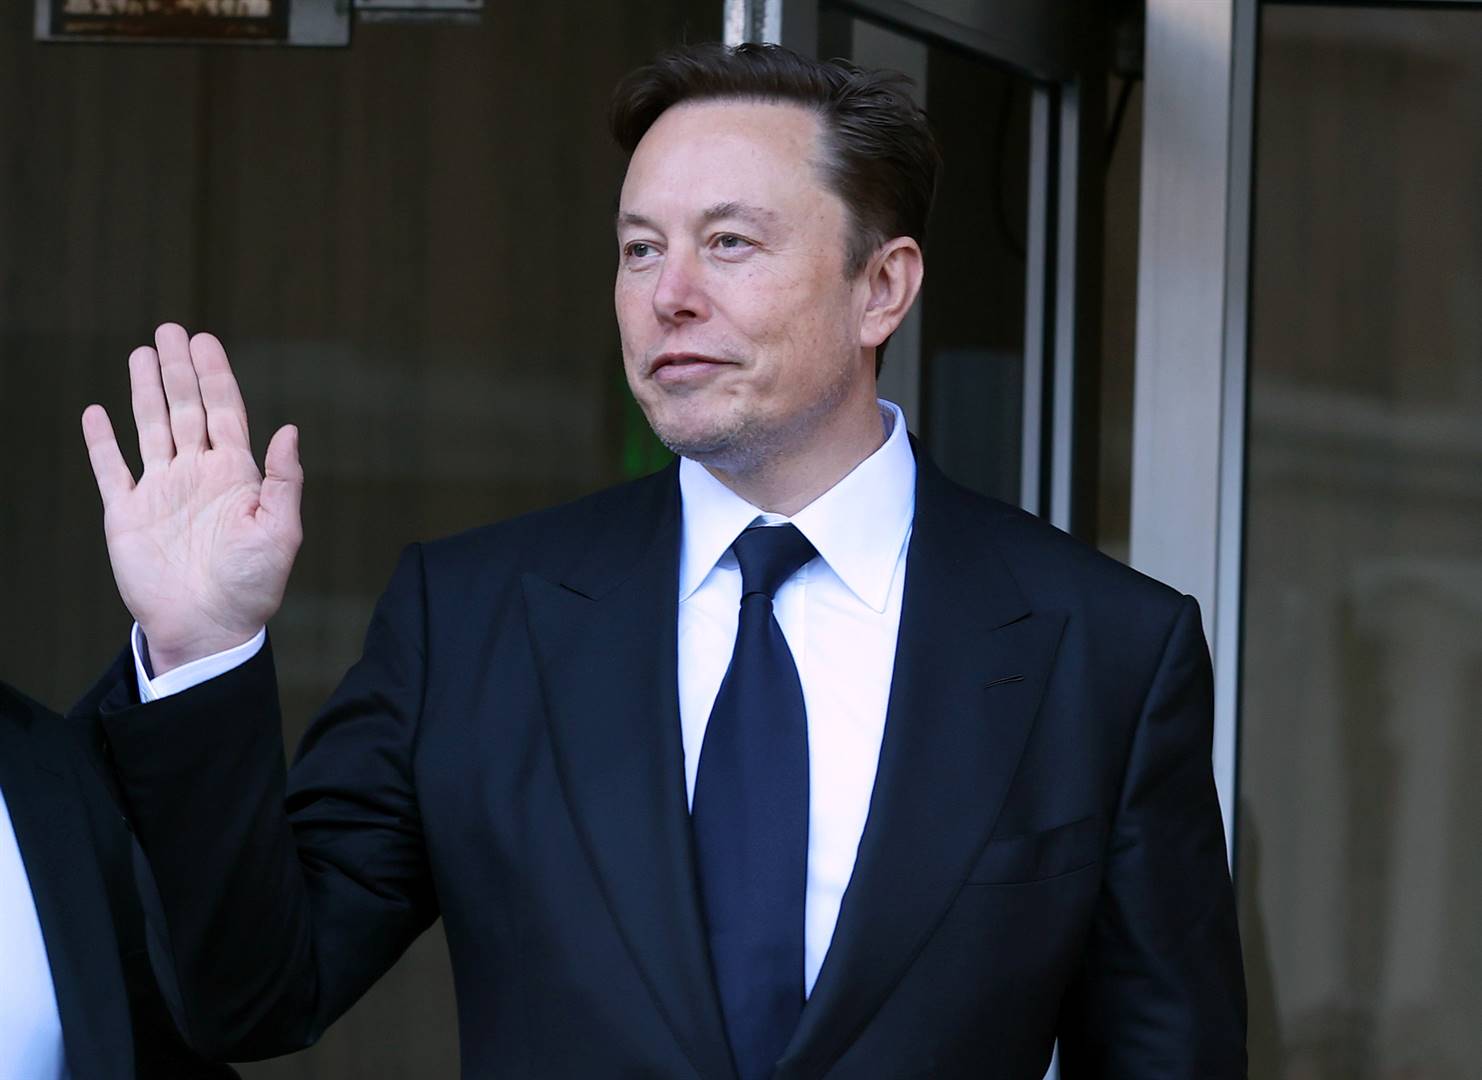 Billionaire Elon Musk swept into Paris on Friday for his second meeting with French President Emmanuel Macron in recent weeks.